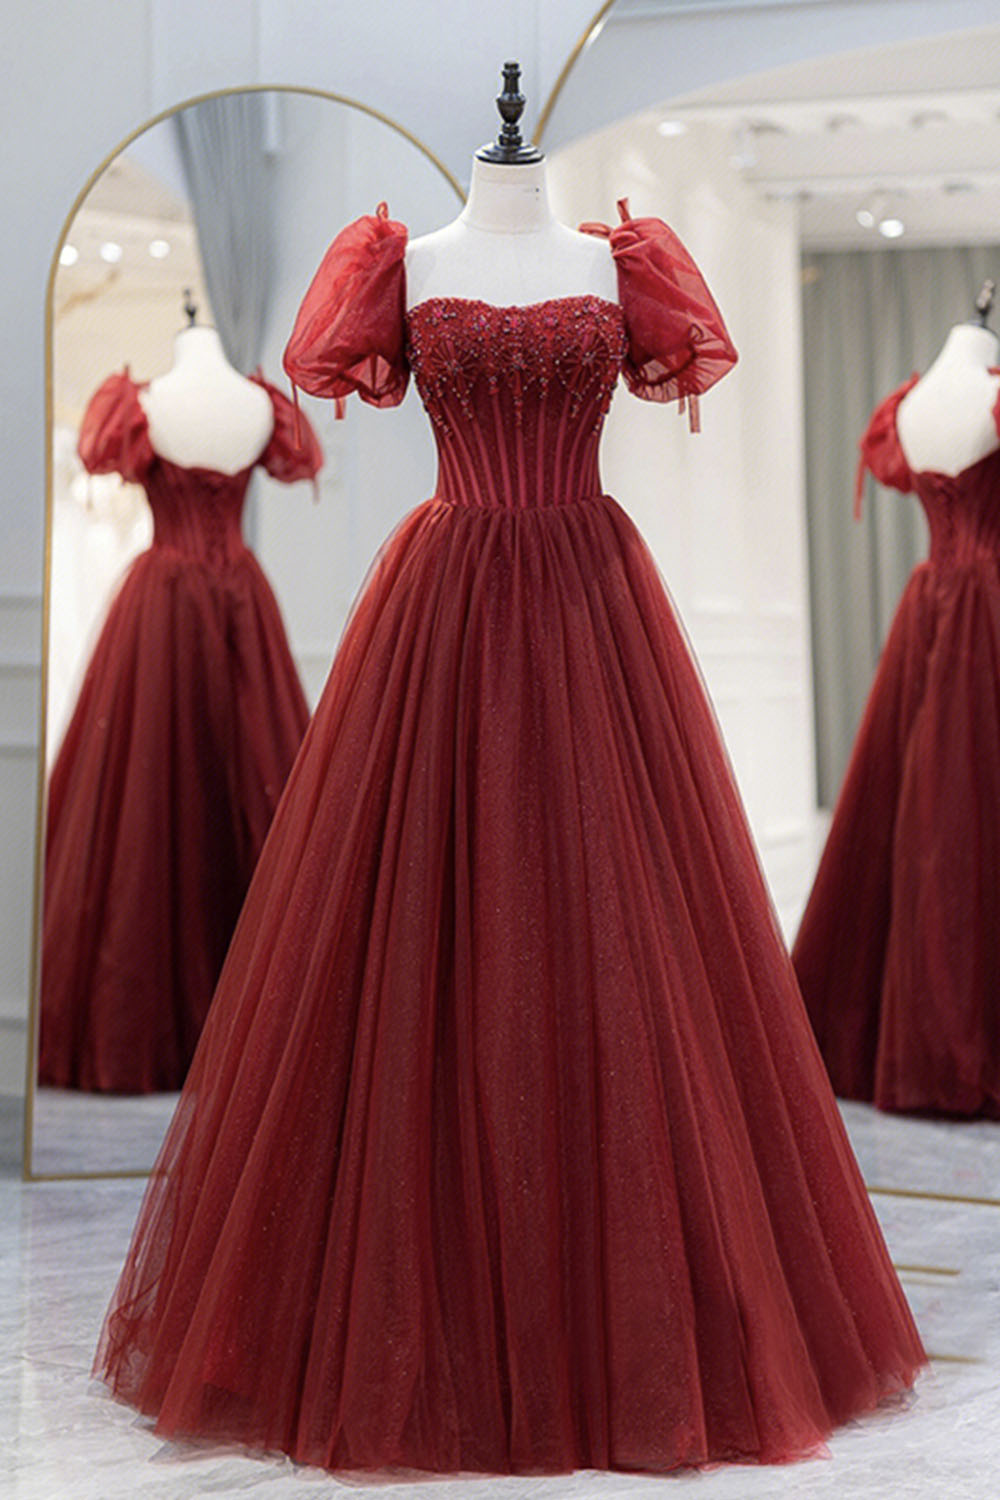 Burgundy Tulle Beaded Long Prom Dress Outfits For Girls, A-Line Short Sleeve Formal Dress